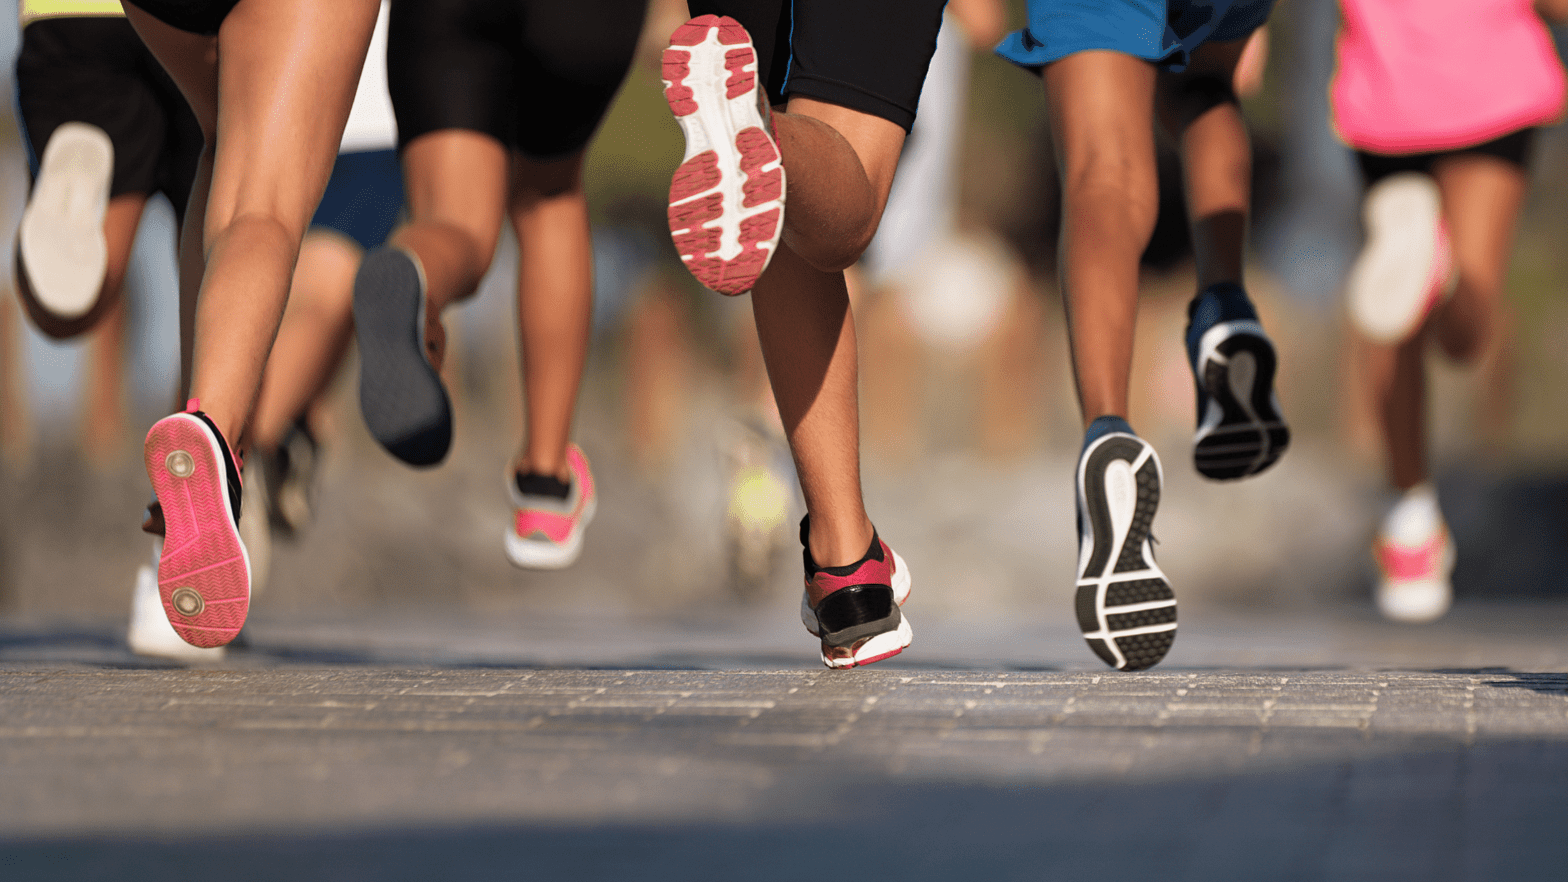 Running to Lose Weight: An Interview with Orthopedic Surgeon, Michael J. Willenborg, M.D.